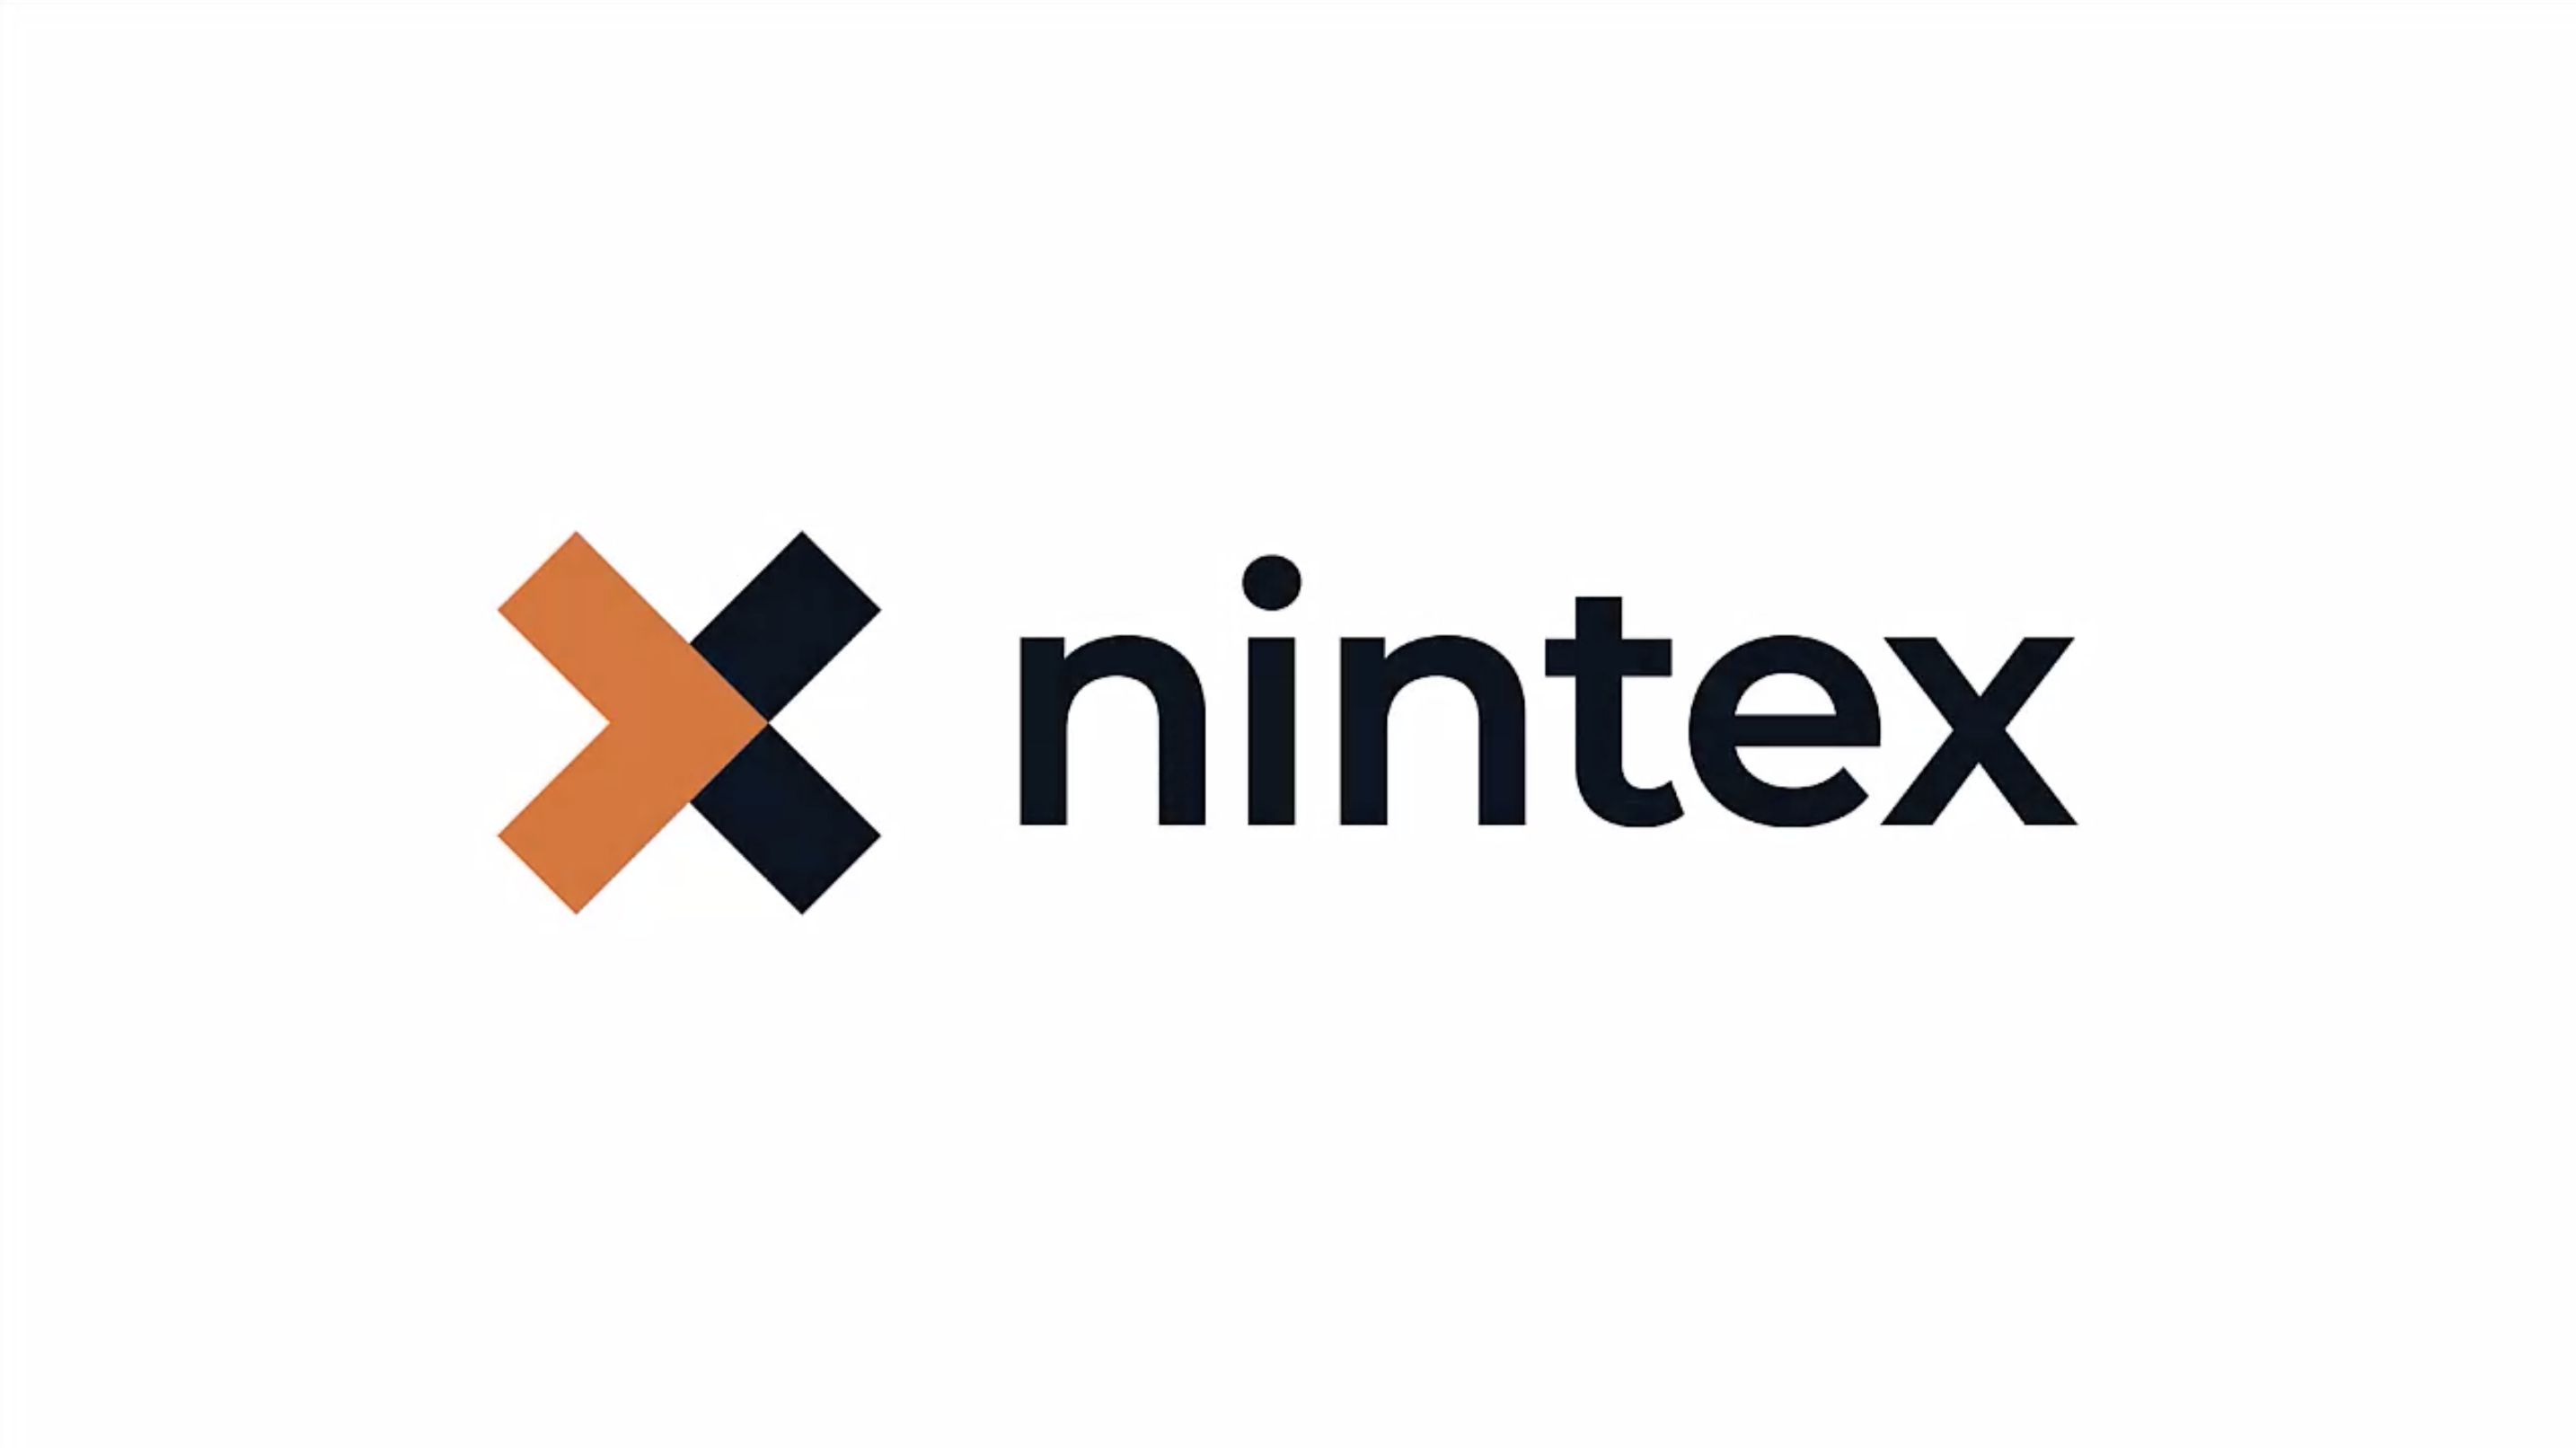 New Nintex Research Shows UK Businesses Need Strong Values and Corporate Cultures to Attract and Retain Gen Z Talent